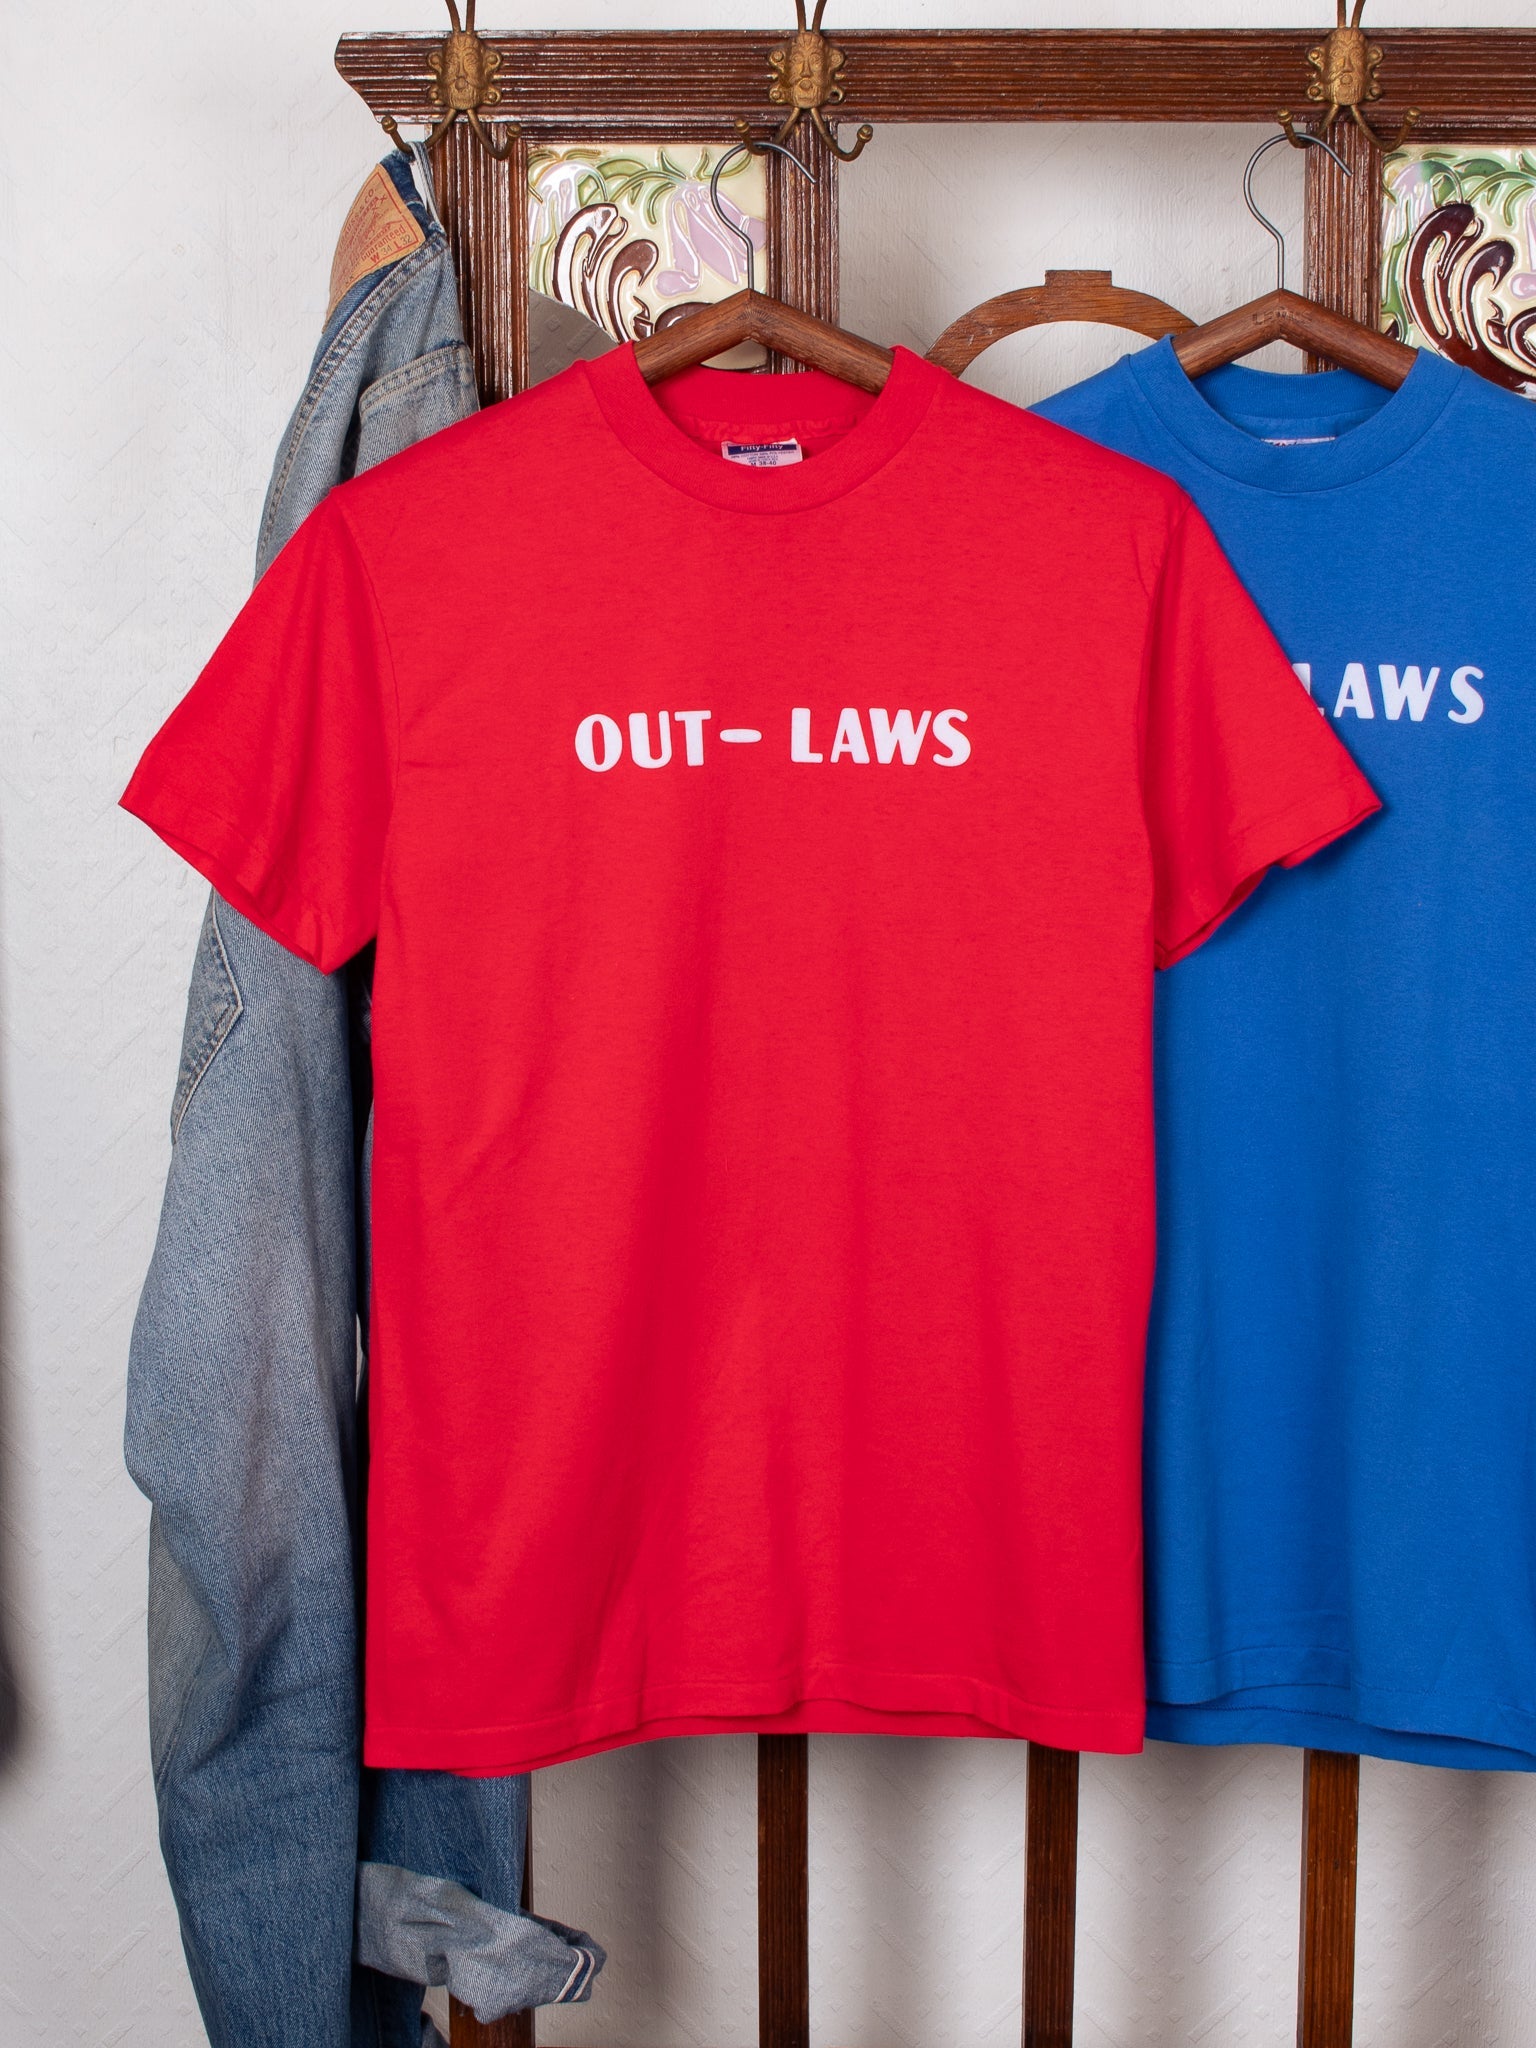 vintage 80s Out-Laws Tee